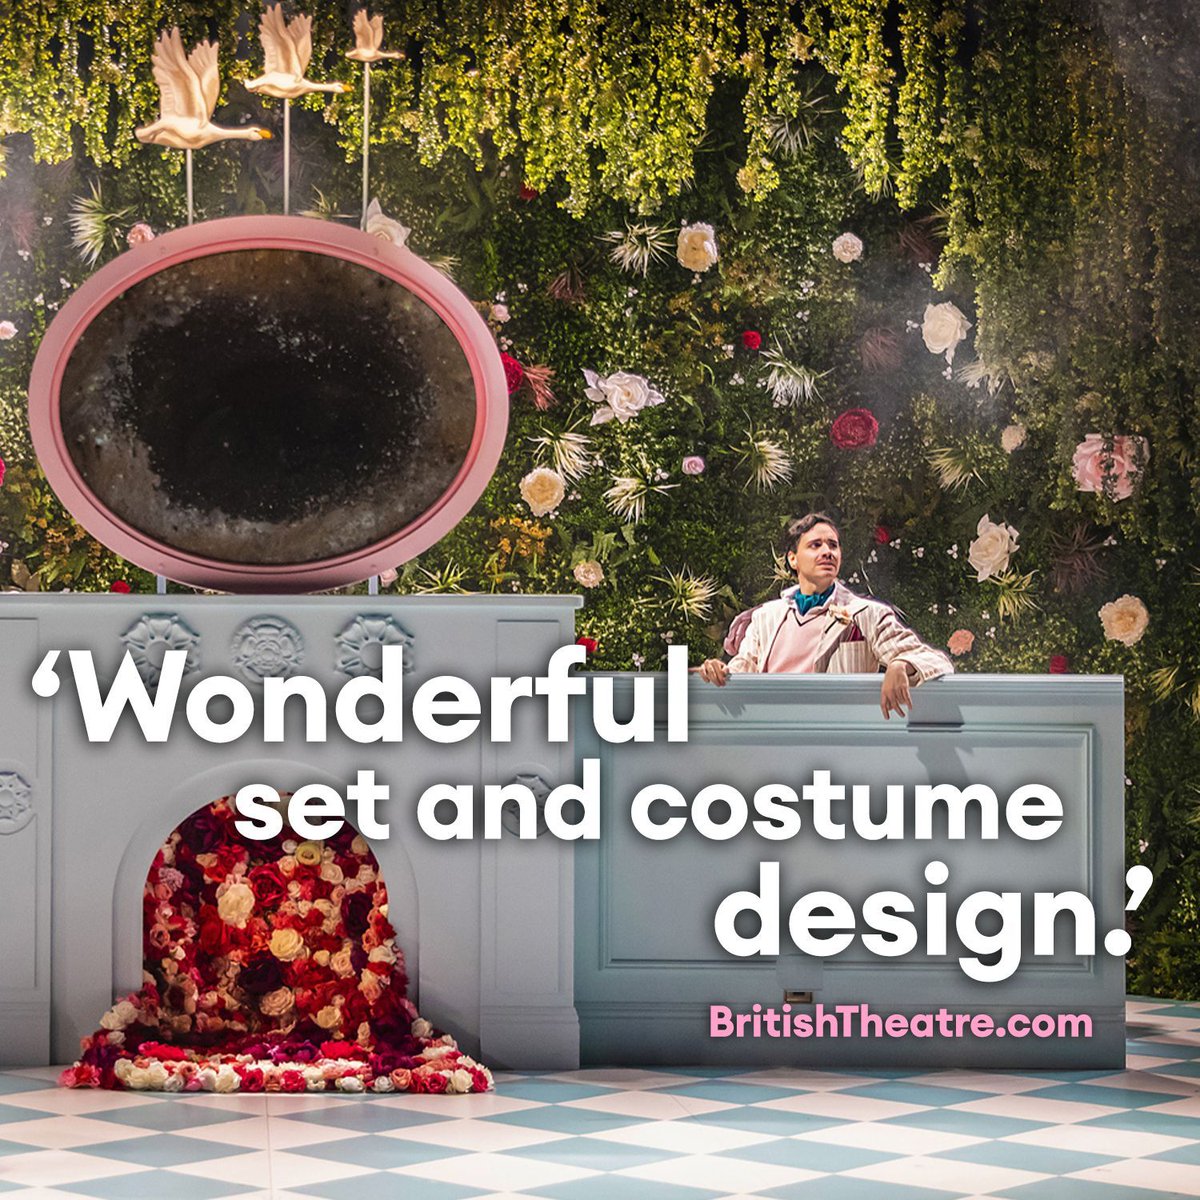 More reviews are flooding in from @Curtain_CallRev and @British_Theatre for The Importance of Being Earnest and just in time! There's less than a week to catch this Wilde comedy so don't miss out and book here: bit.ly/3wHUATi